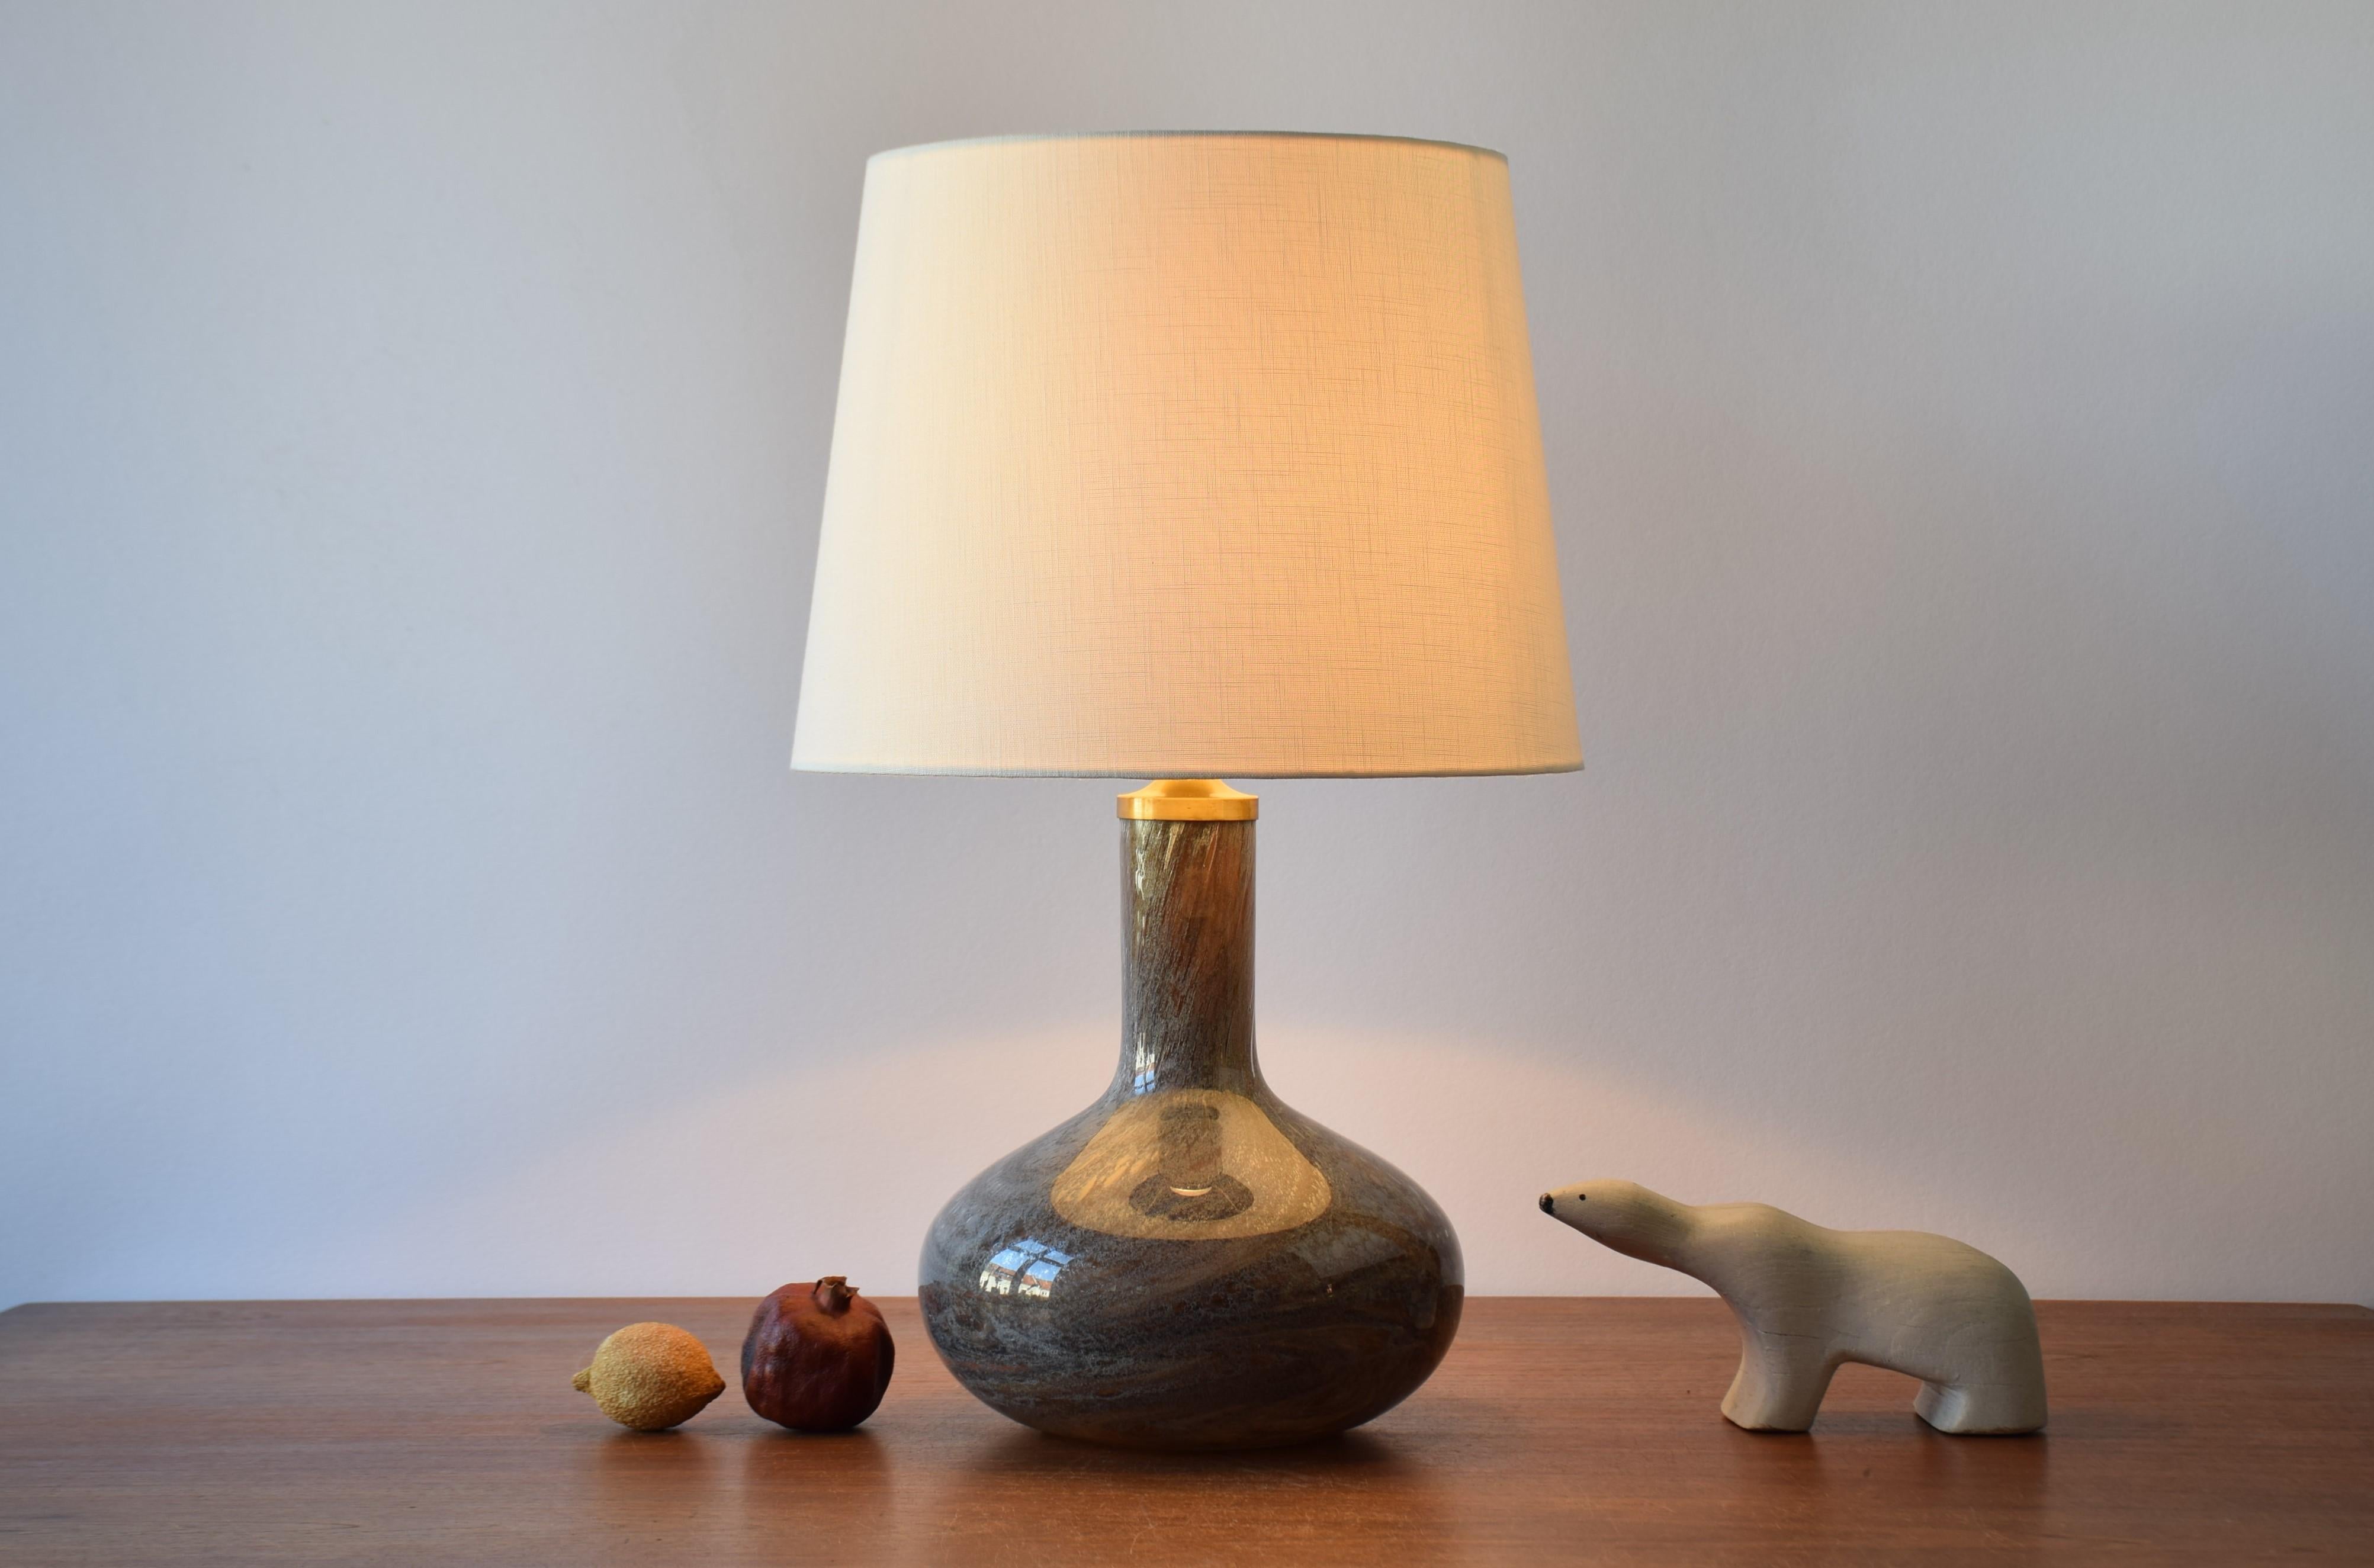 Tall Danish Midcentury table lamp from the 